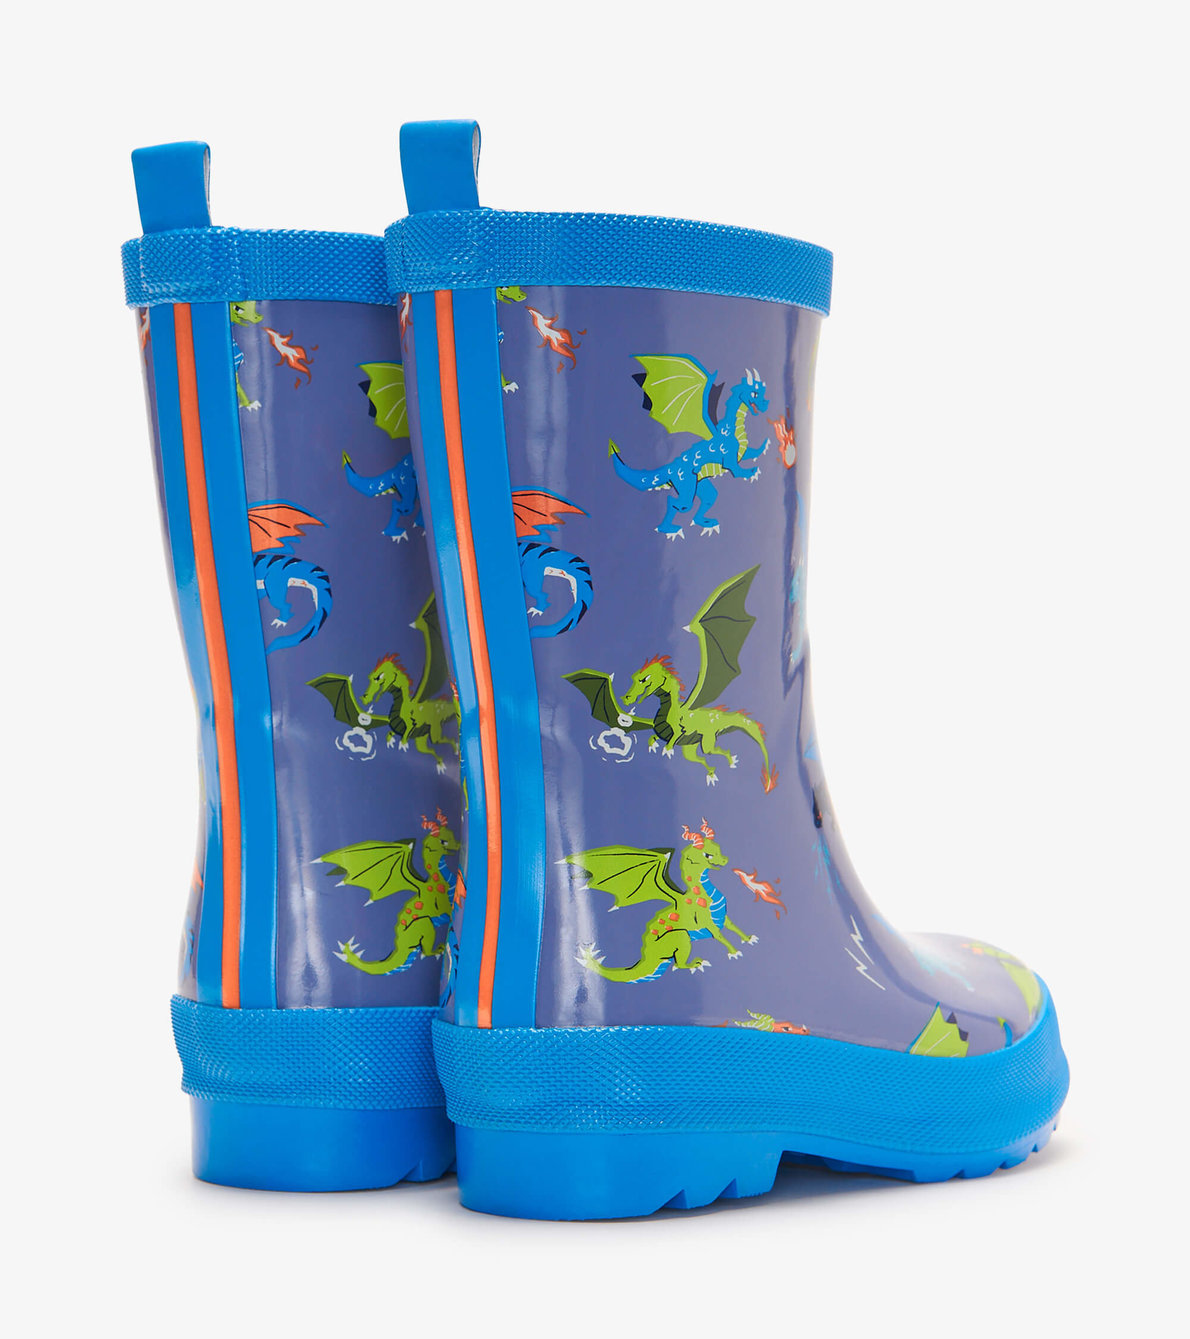 View larger image of Dragon Realm Shiny Kids Wellies